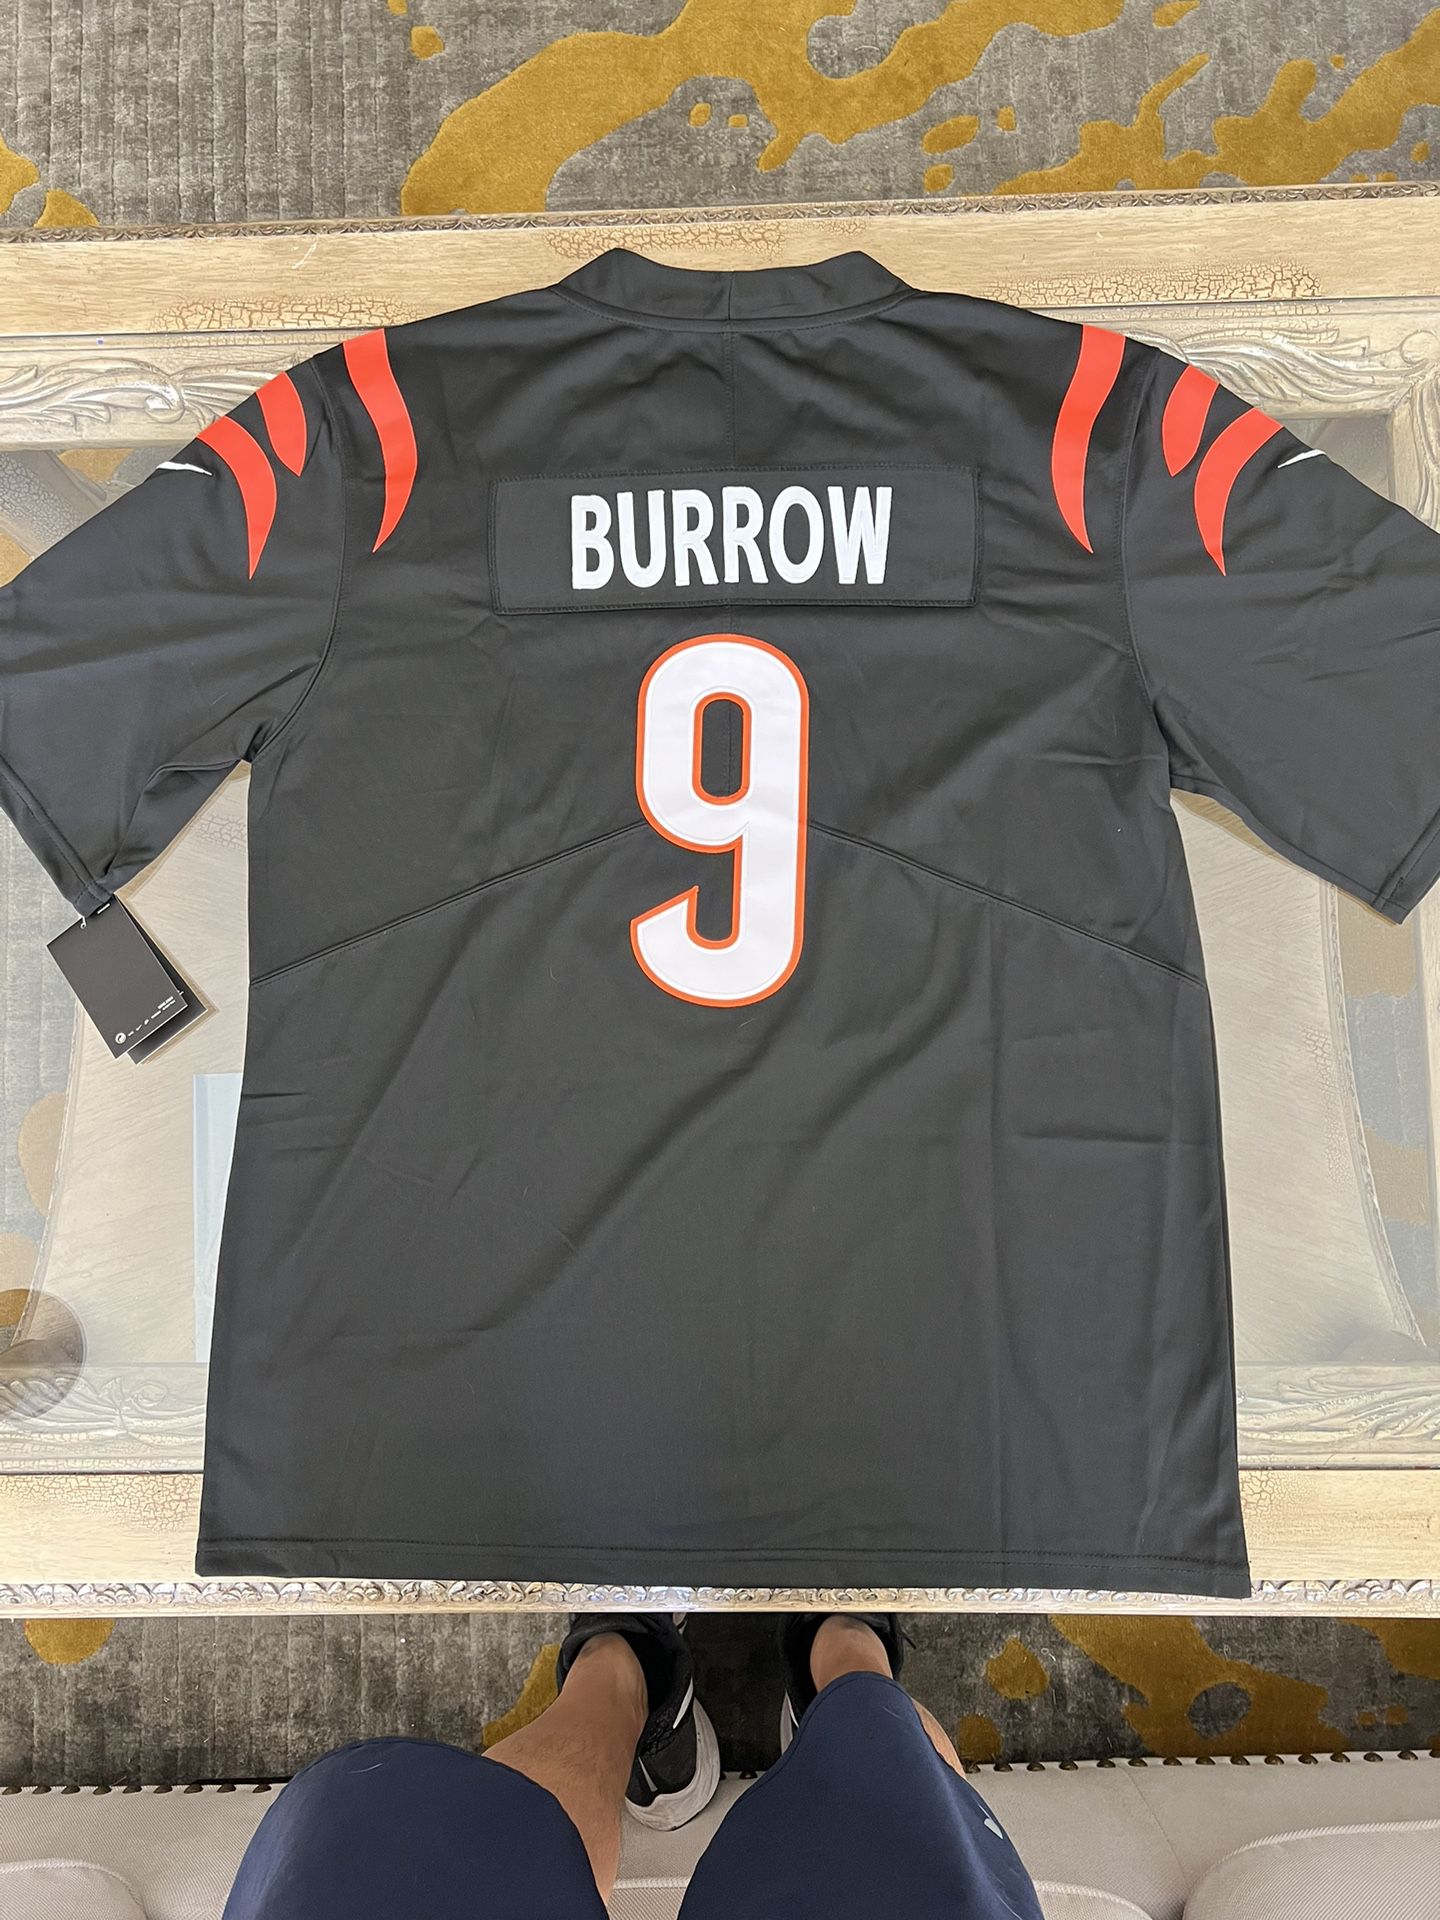 CINCINNATI BENGALS JERSEY SIZE XL YOUTH for Sale in Escondido, CA - OfferUp